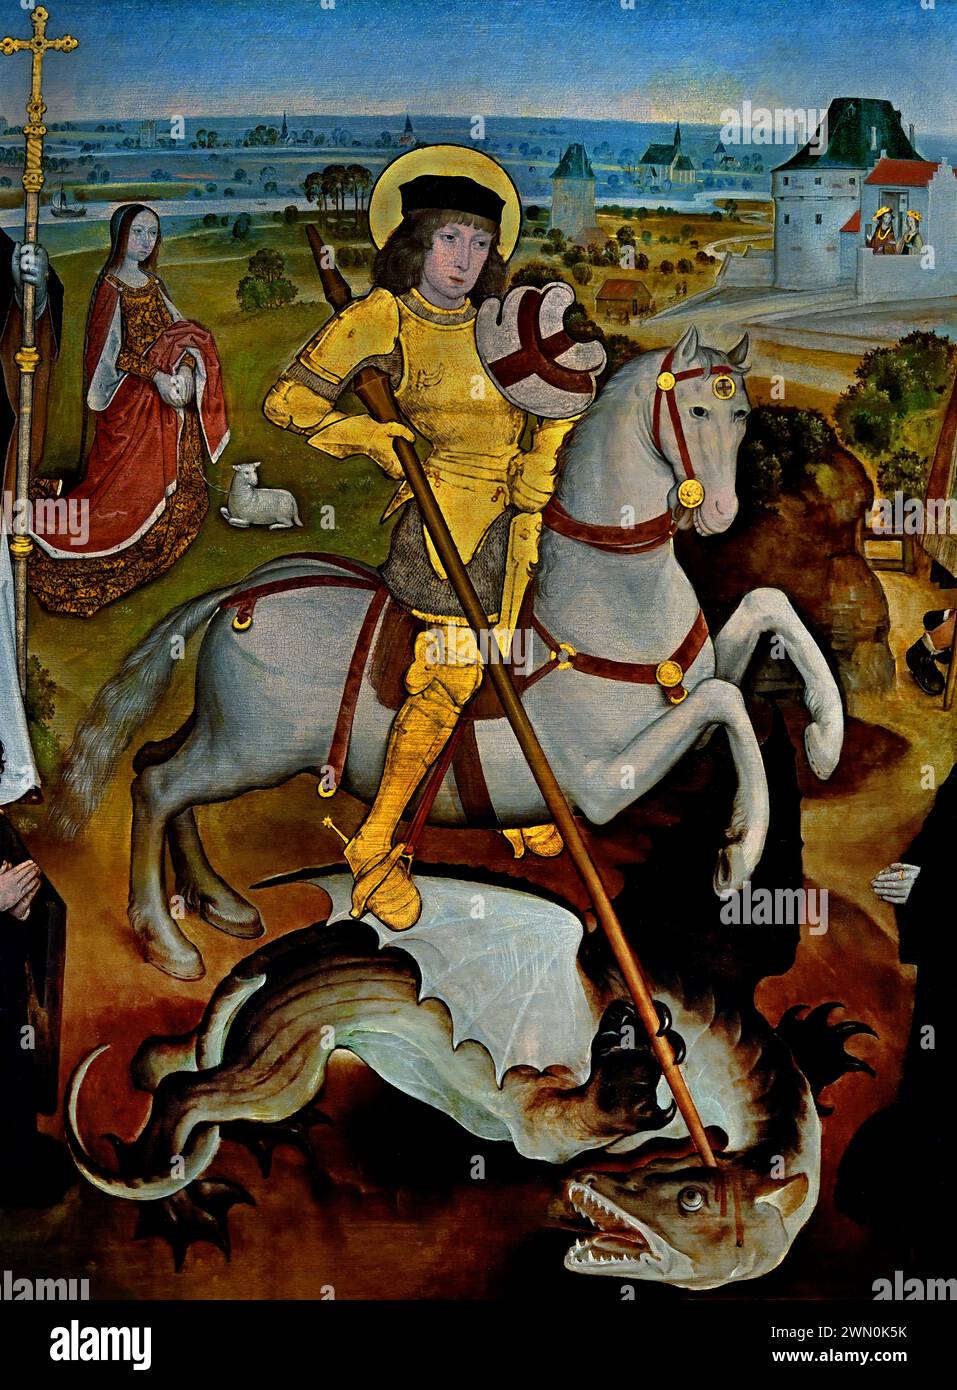 St. George and the Dragon, in a suit of golden armour and seated on a grey horse by The Members of the Guild of the Old Crossbow of Mechelen Meester van de Mechelse Sint-Jorisgilde  Royal Museum of Fine Arts,  Antwerp, Belgium, Belgian  ( Saint George, in a suit of golden armour and seated on a grey horse, is slaying a dragon in the centre of this painting.  heroic deed saved the Stock Photo